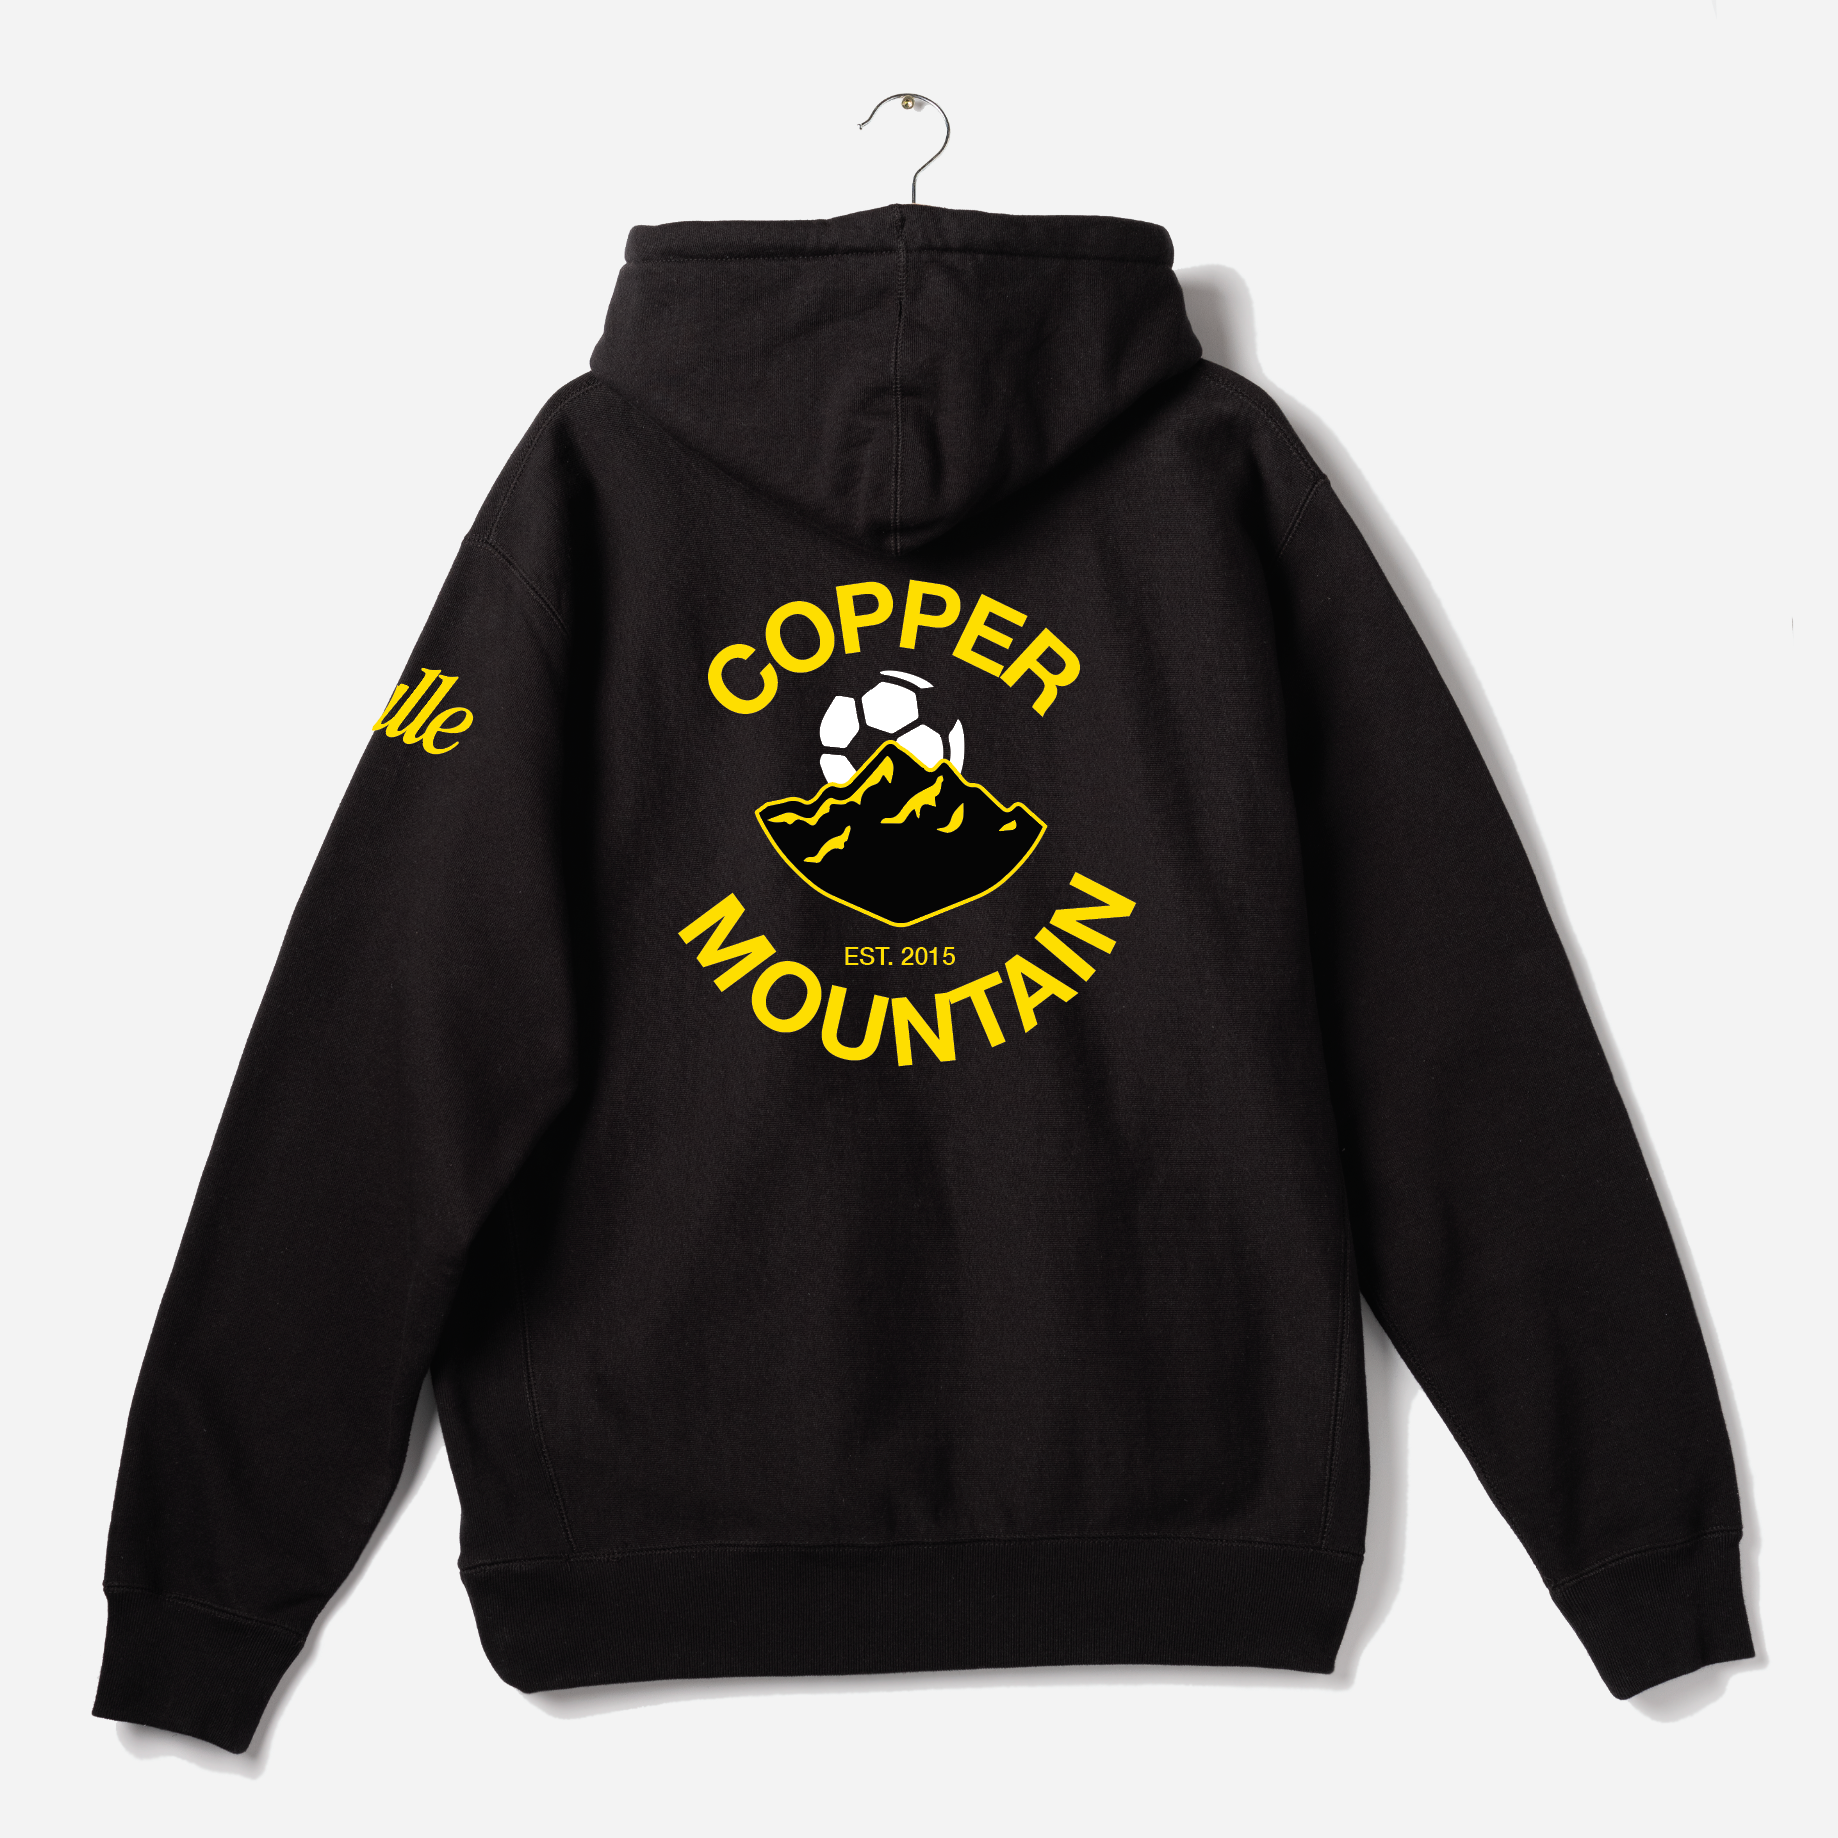 Copper Mountain x Calle "Classic" Hoodie